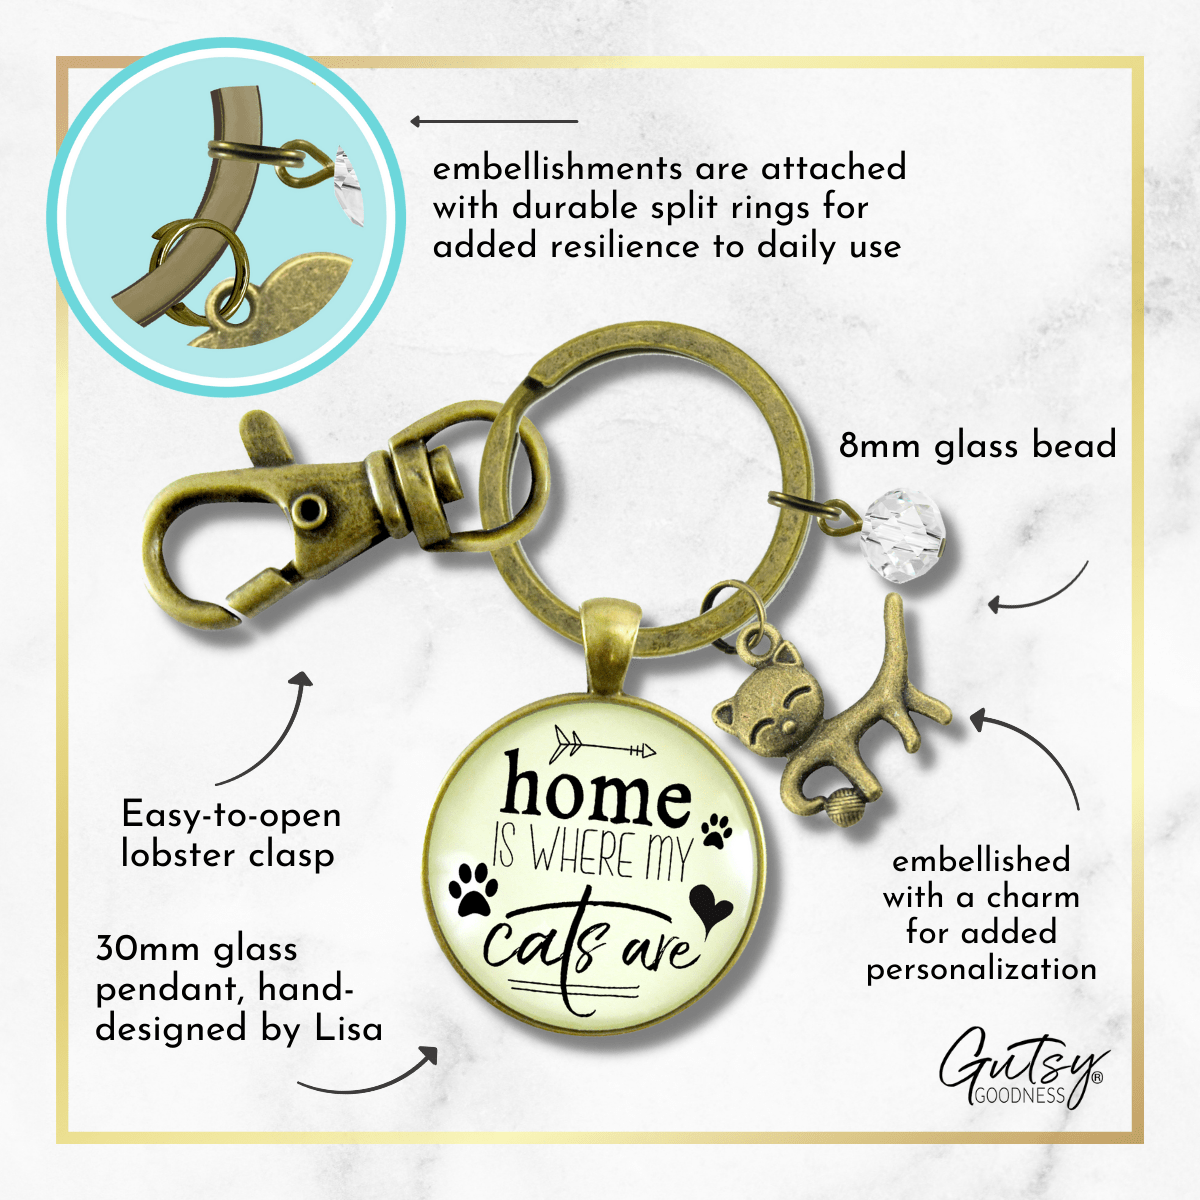 Cats Keychain Home Is Where My Cats Are Gift Quote Kitty Lover Related Feline Jewelry For Women - Gutsy Goodness Handmade Jewelry;Cats Keychain Home Is Where My Cats Are Gift Quote Kitty Lover Related Feline Jewelry For Women - Gutsy Goodness Handmade Jewelry Gifts